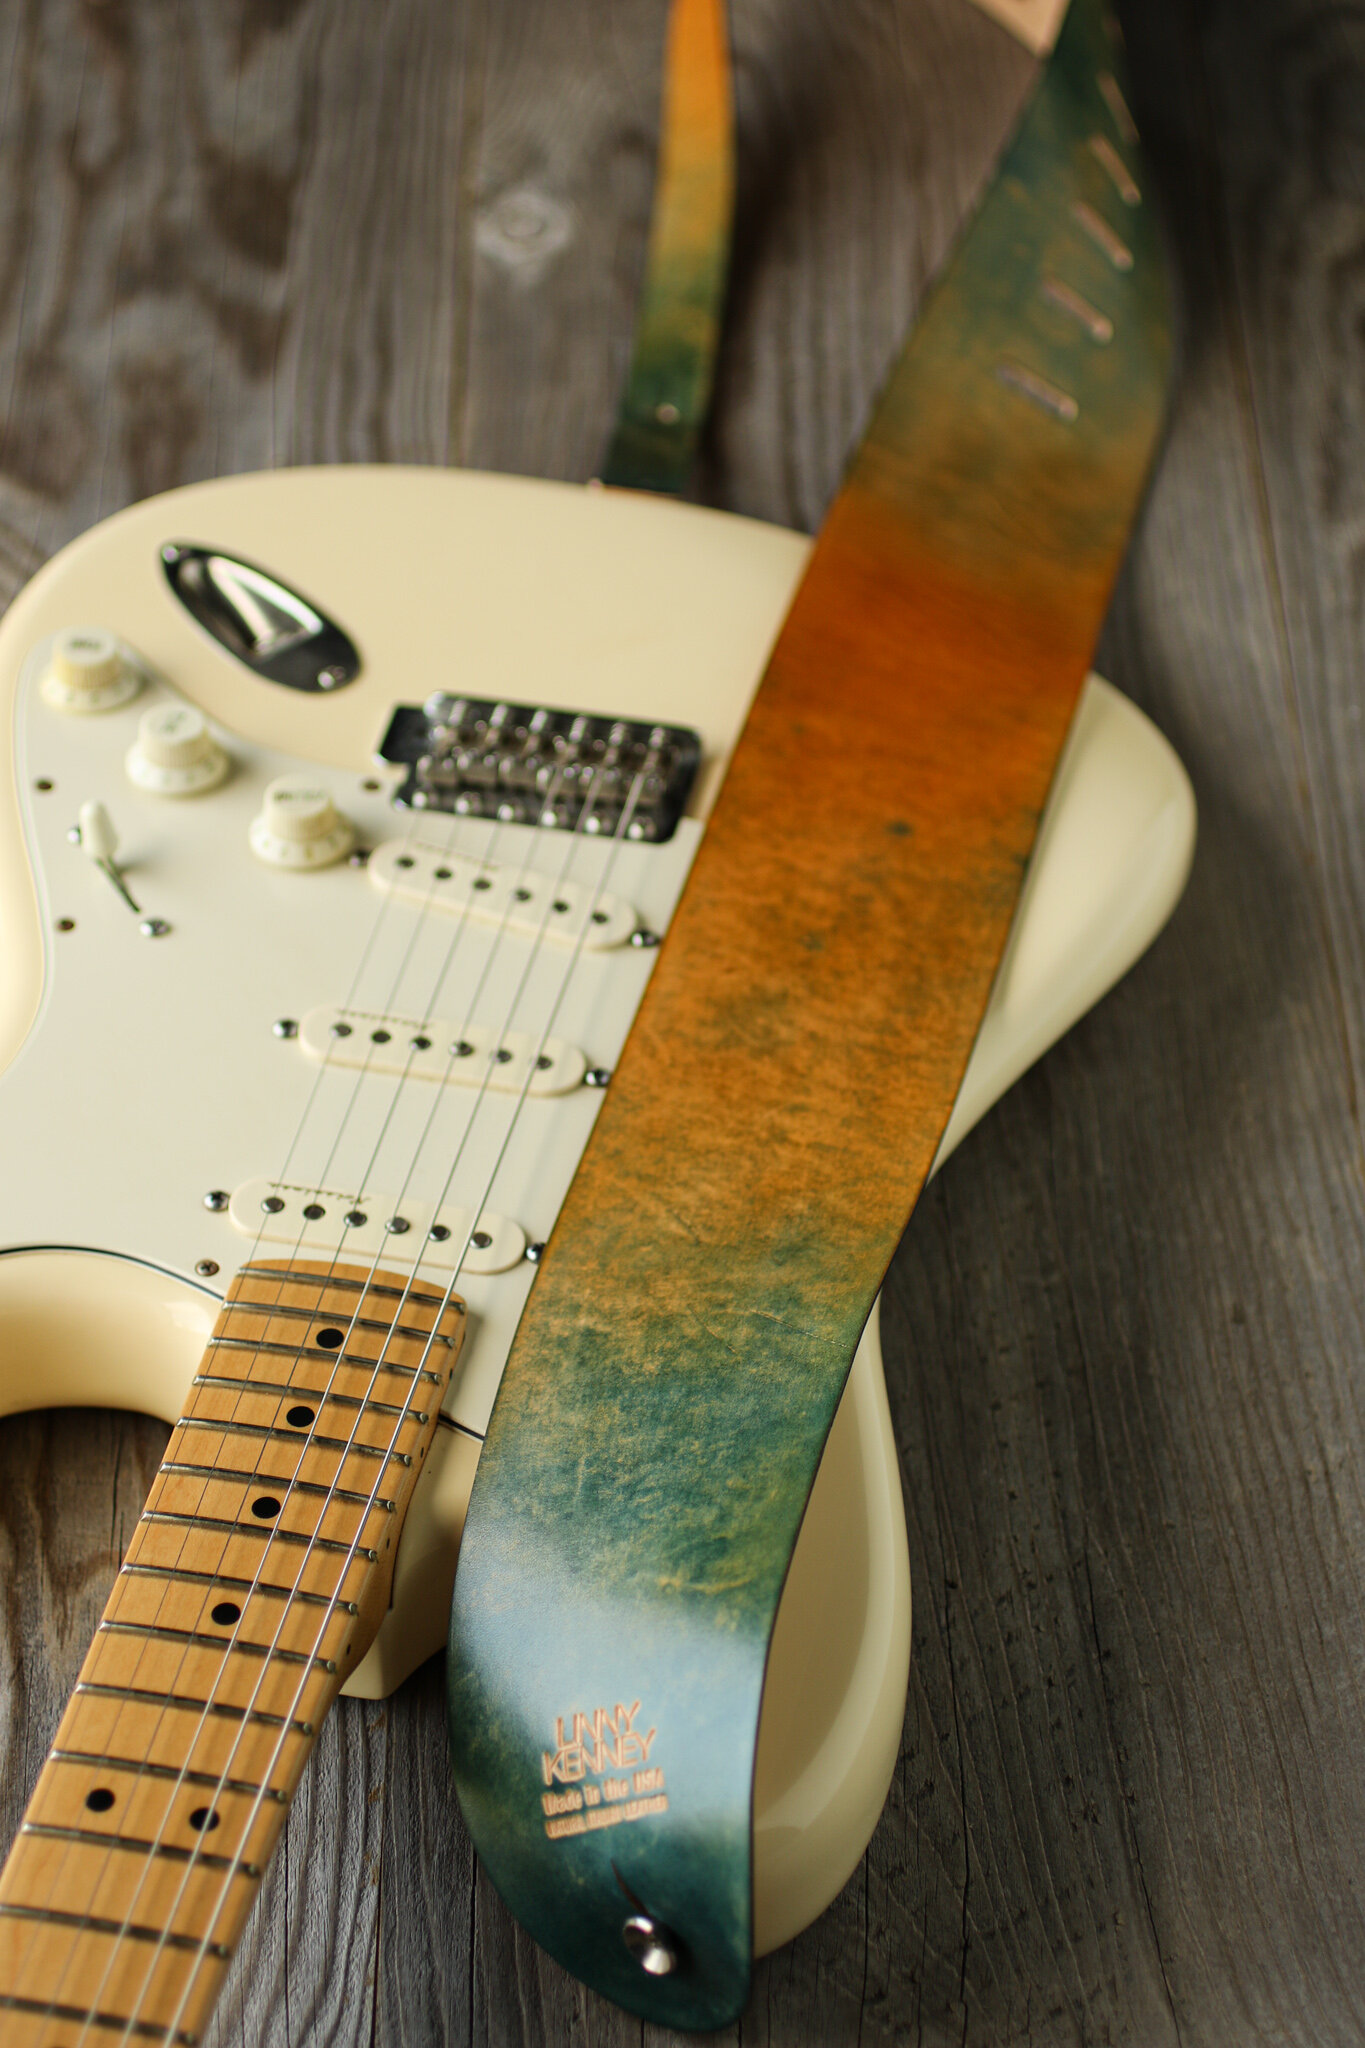 Fire and Water Signature Guitar Strap — Linny Kenney